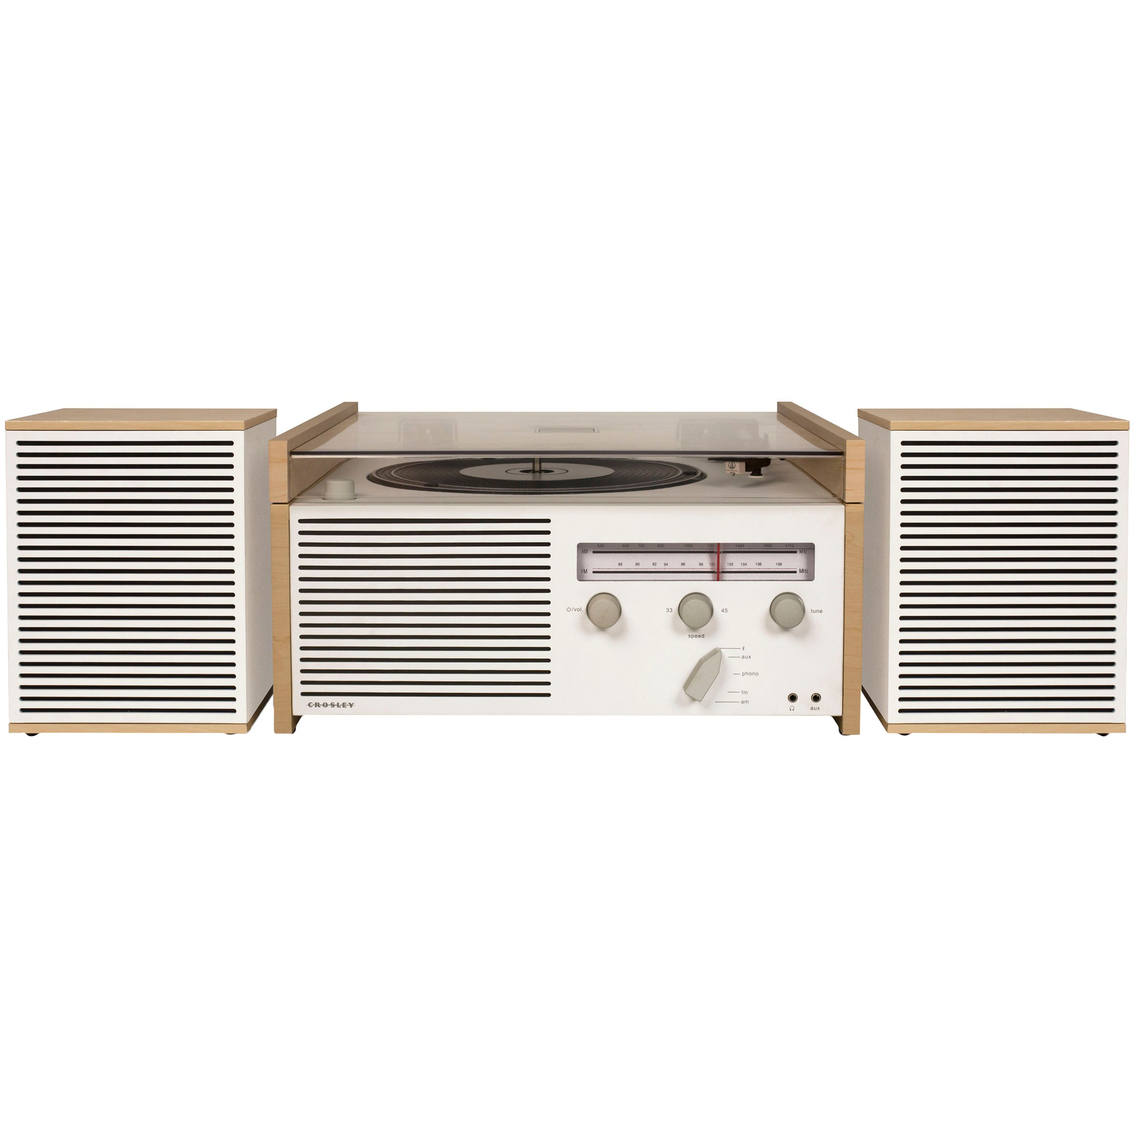 Crosley Switch II Entertainment System - Image 3 of 6